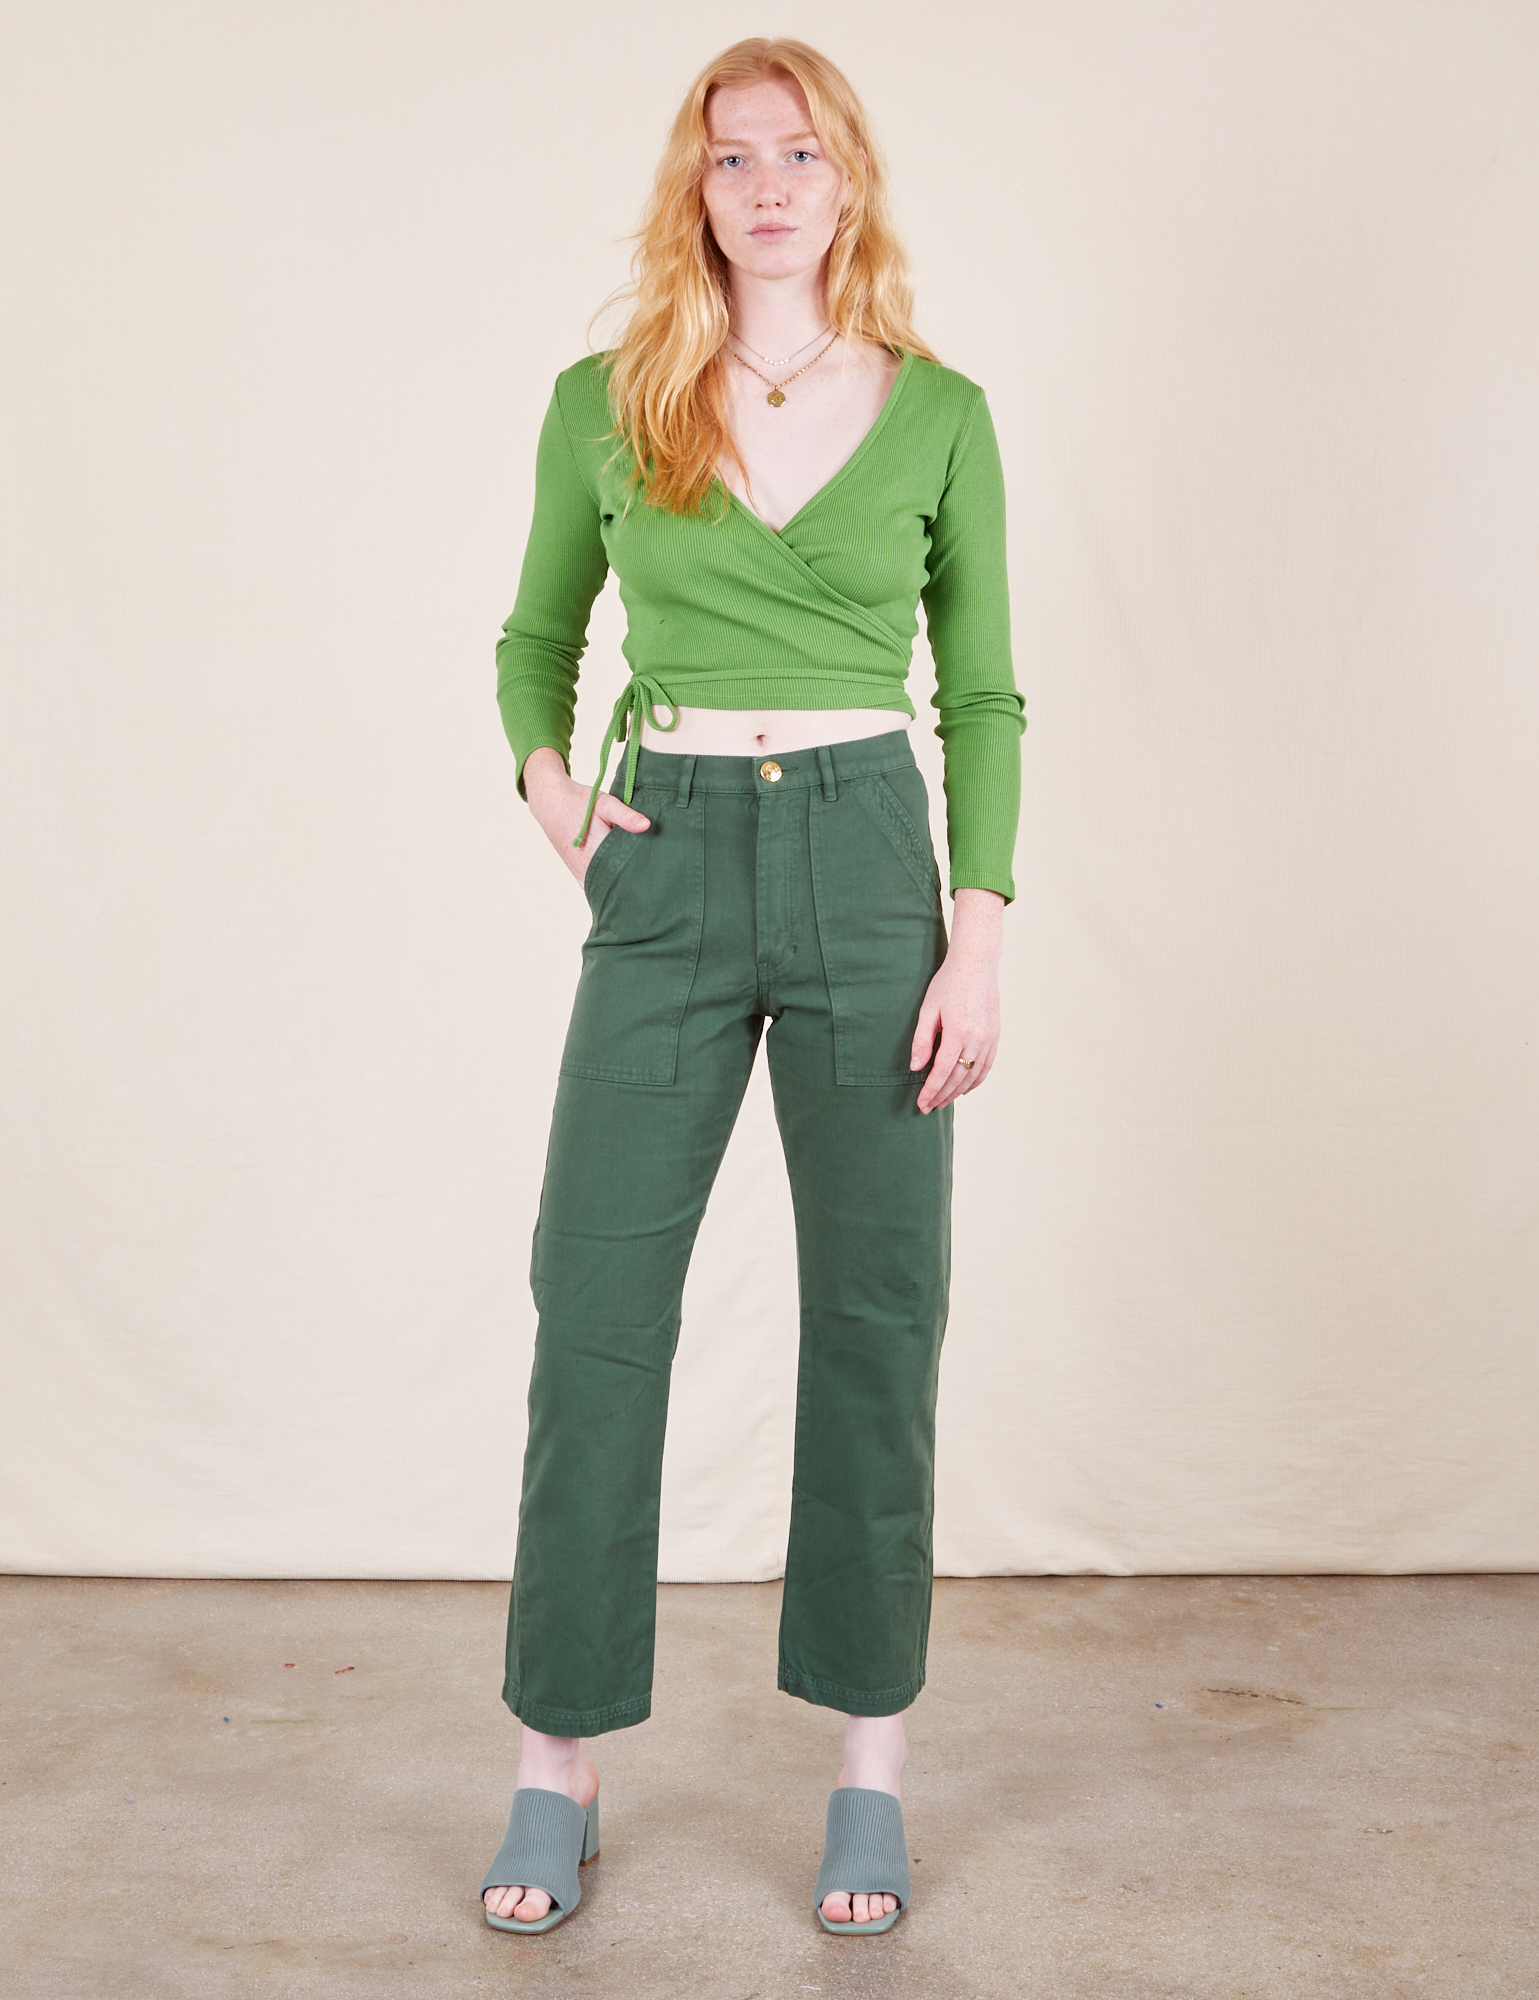 Margaret is 5'11" and wearing XXS Work Pants in Dark Emerald Green paired with bright olive Wrap Top